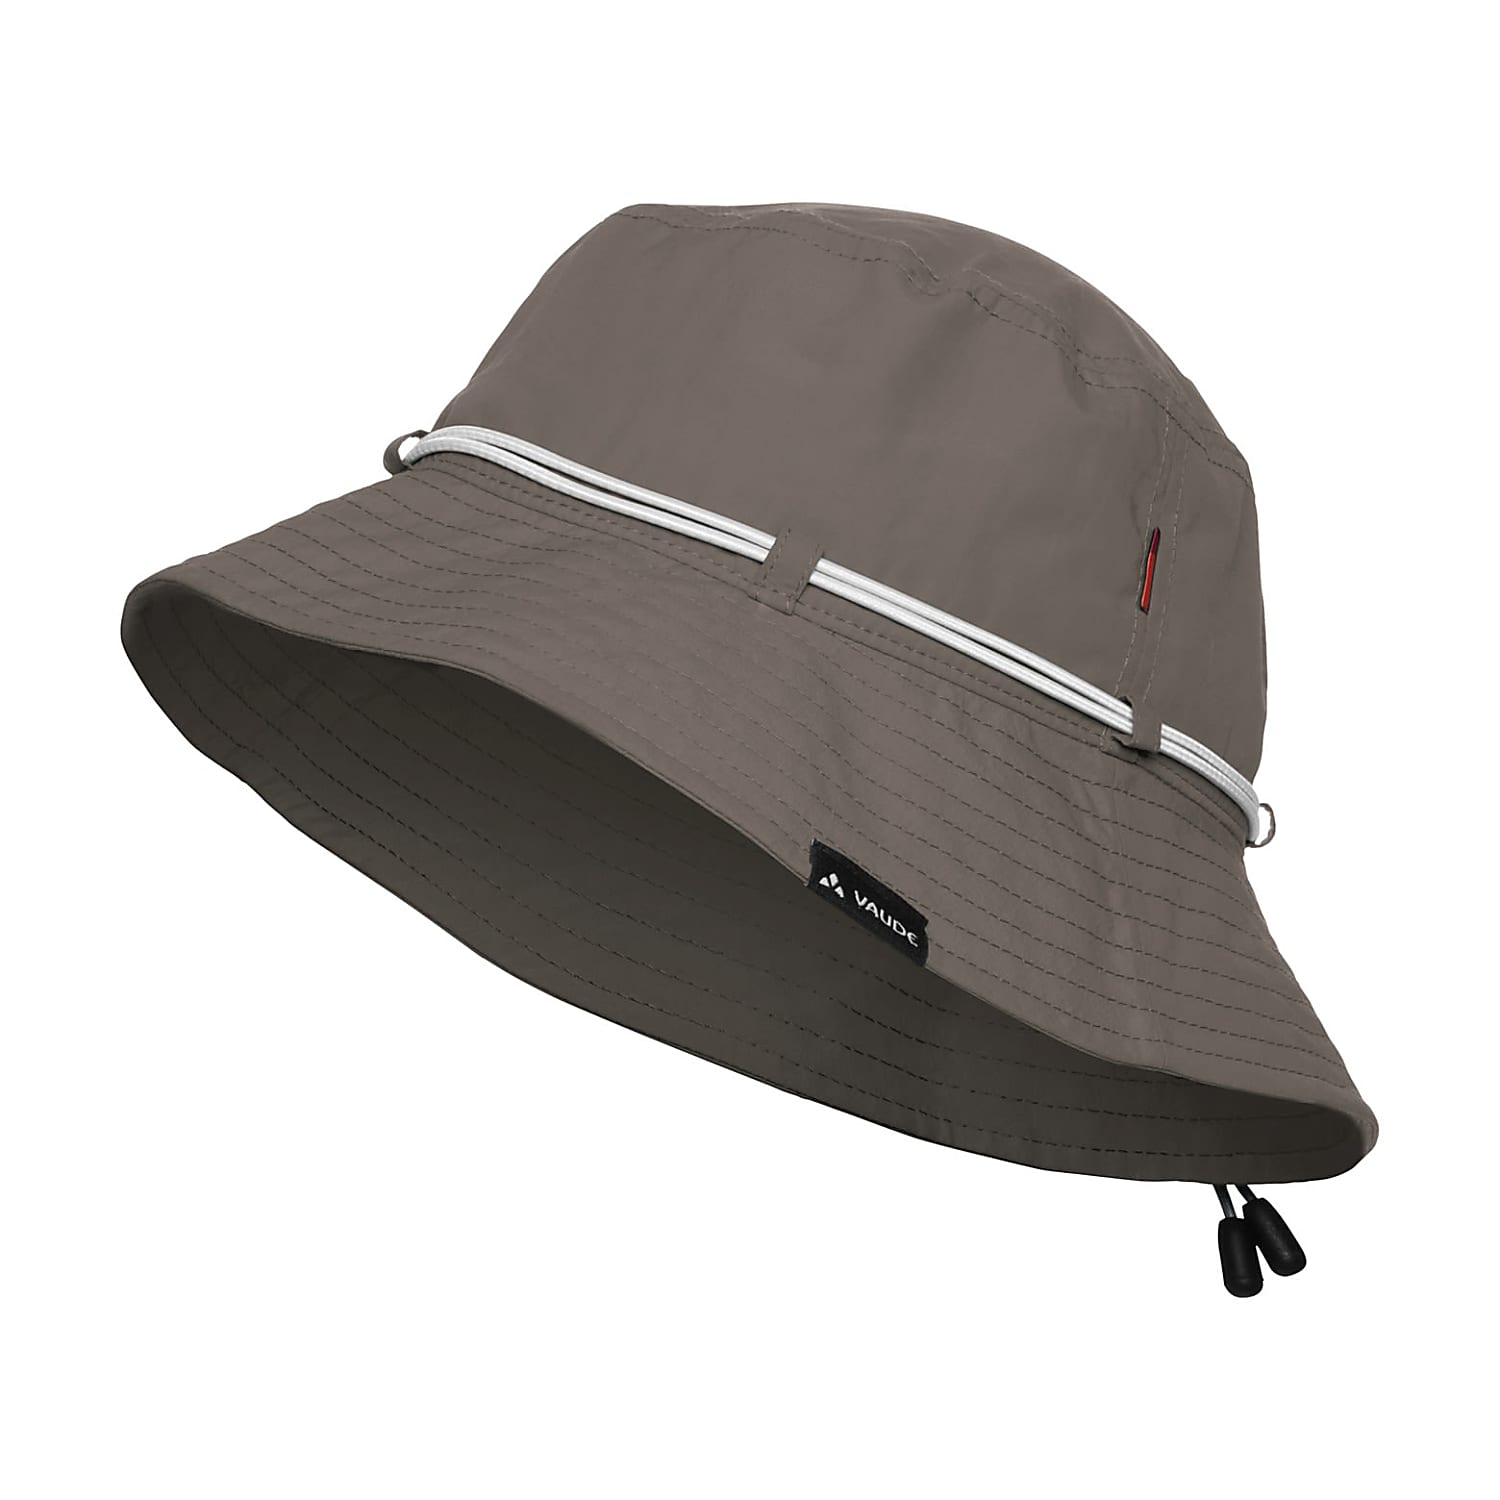 WOMENS Coconut - shipping Vaude HAT, Fast cheap and TEEK